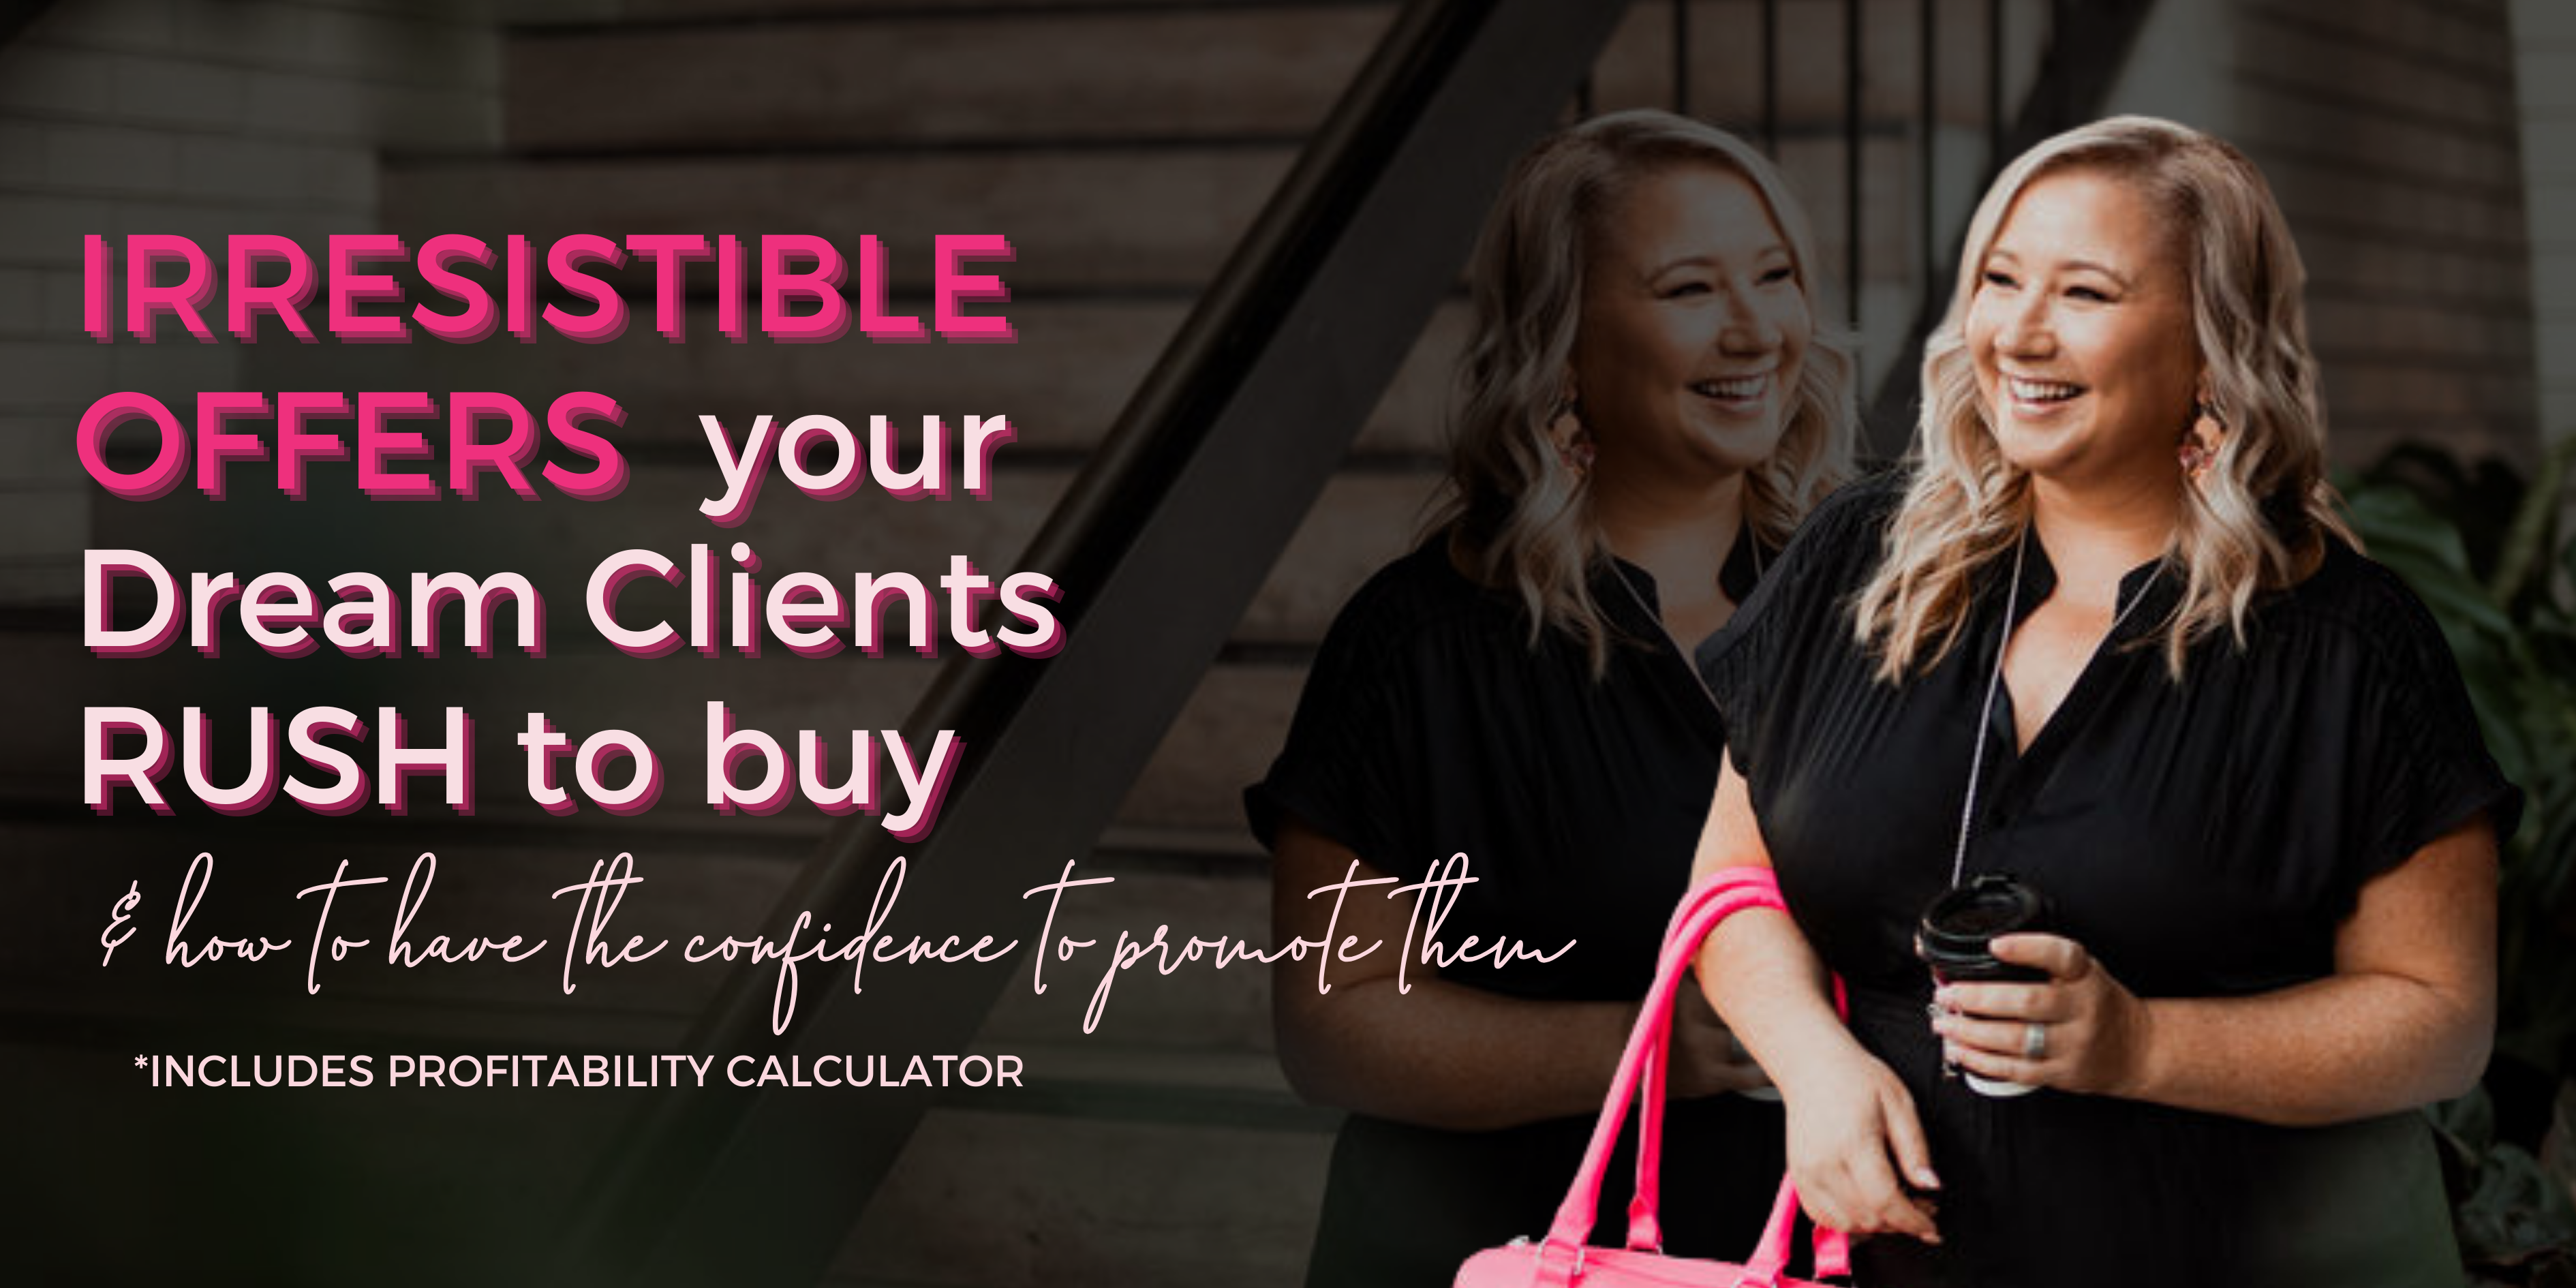 Irresistible Offers your Dream clients rush to buy 